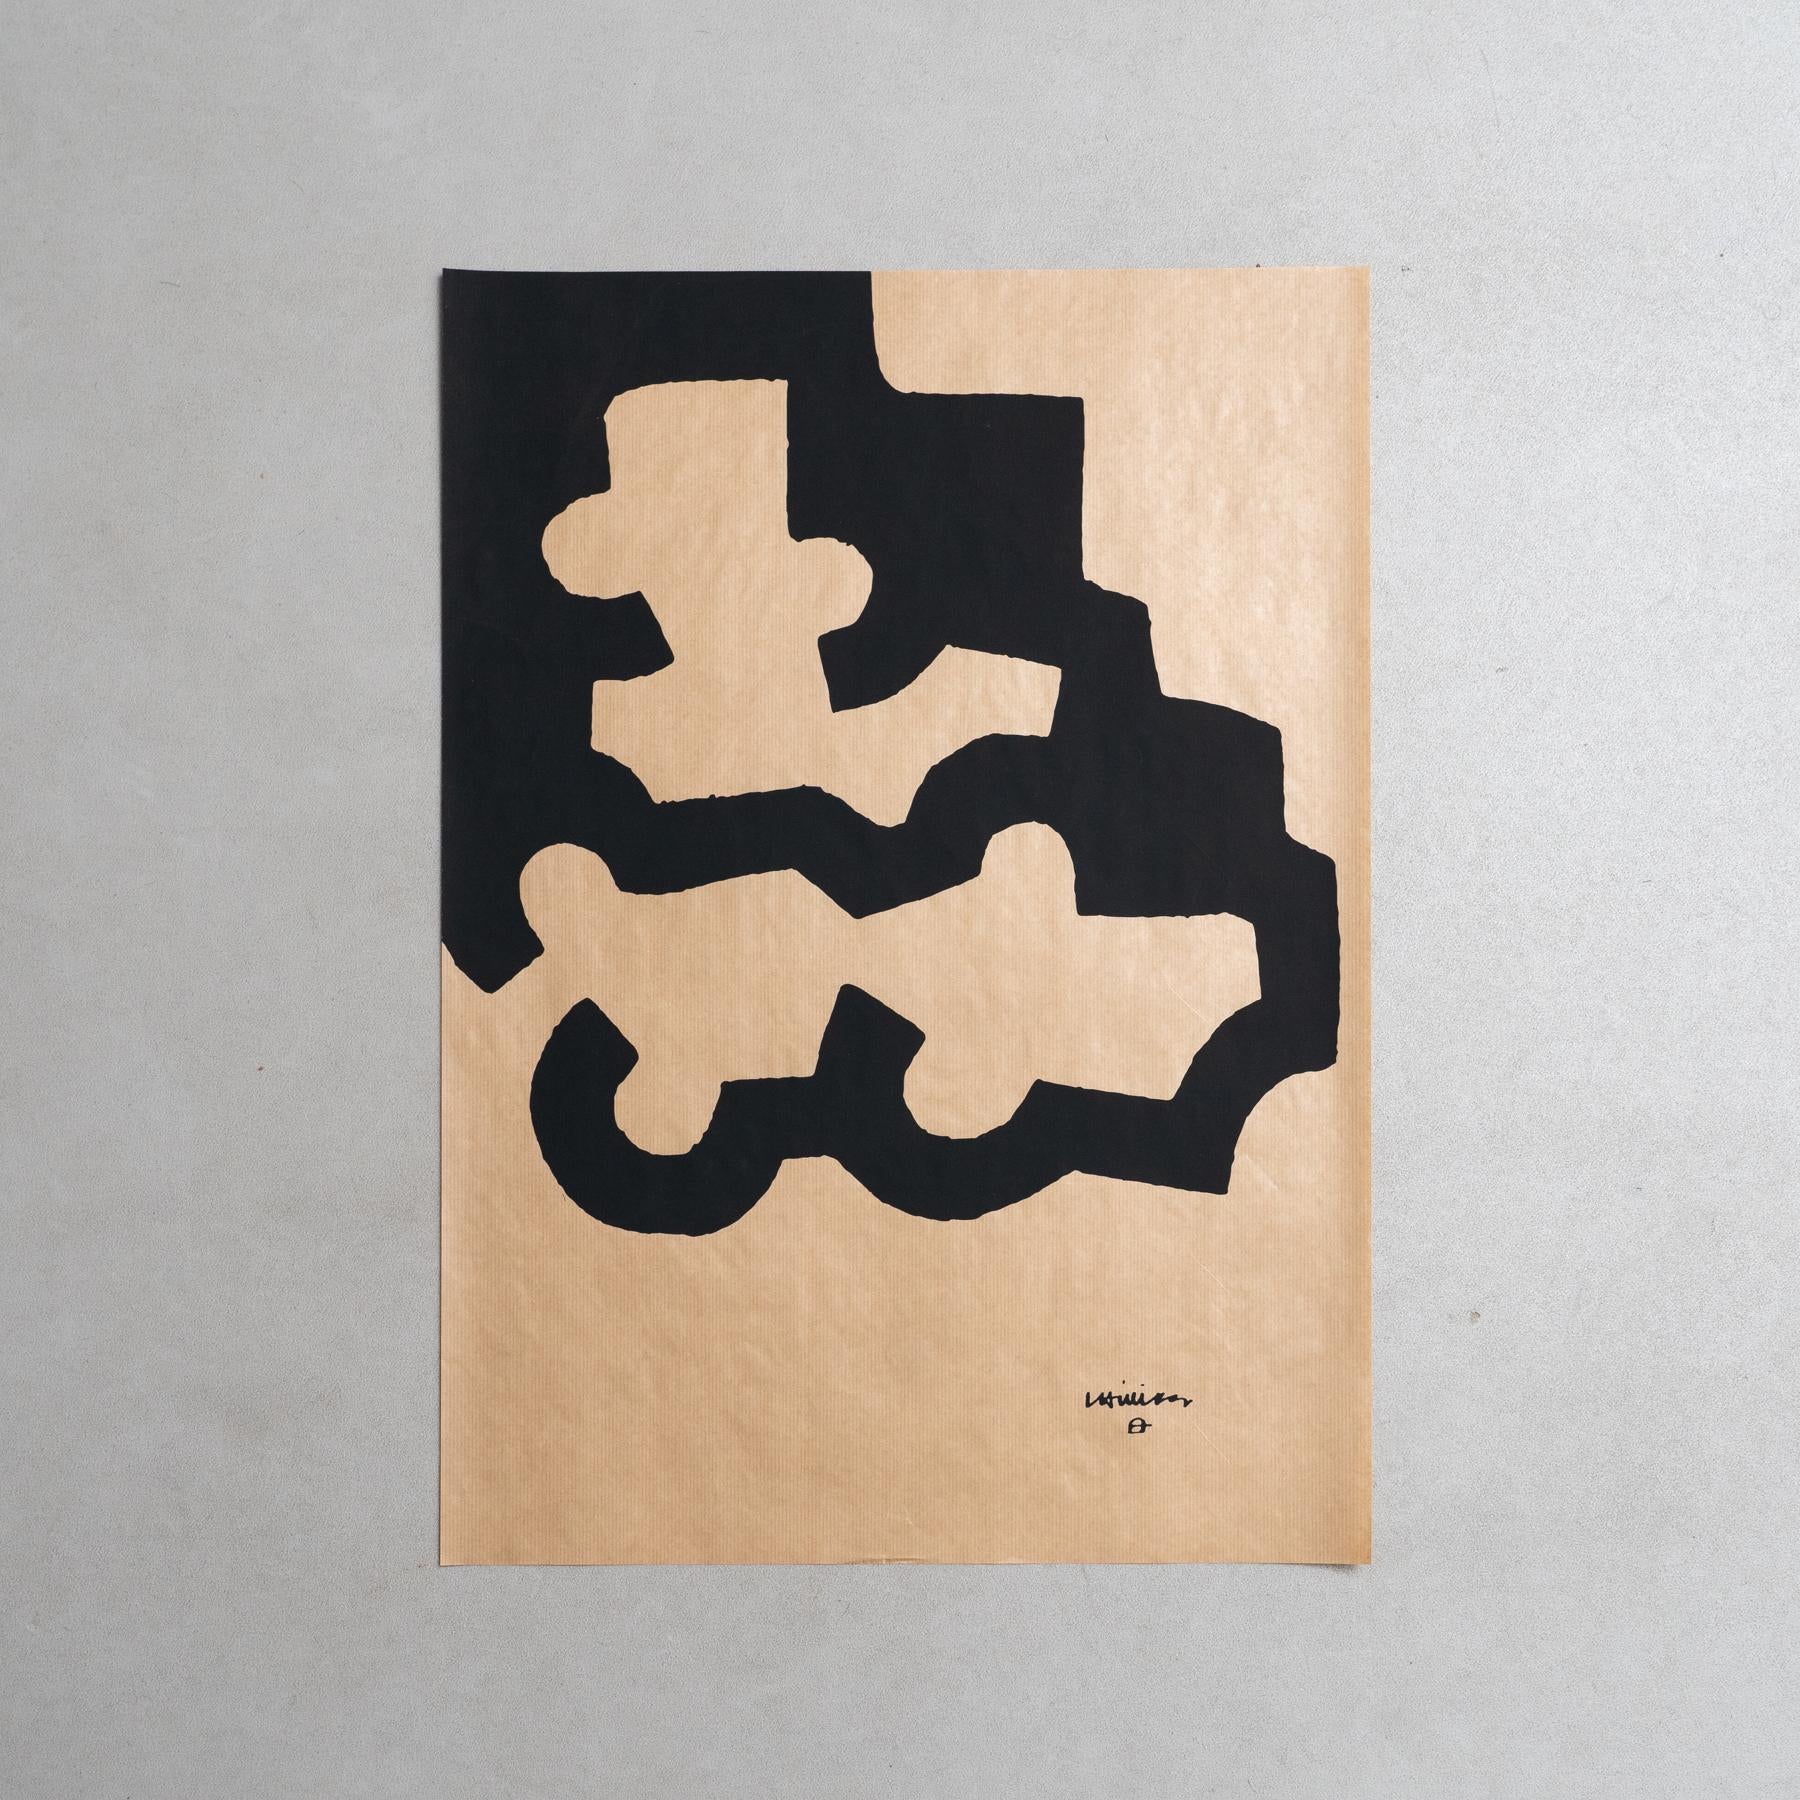 Eduardo Chillida print.
Spain, circa 1990.

Introduce a touch of modern Spanish artistry to your space with this striking Eduardo Chillida print, circa 1990. The renowned artist's bold, abstract style and masterful use of lines and shapes make this